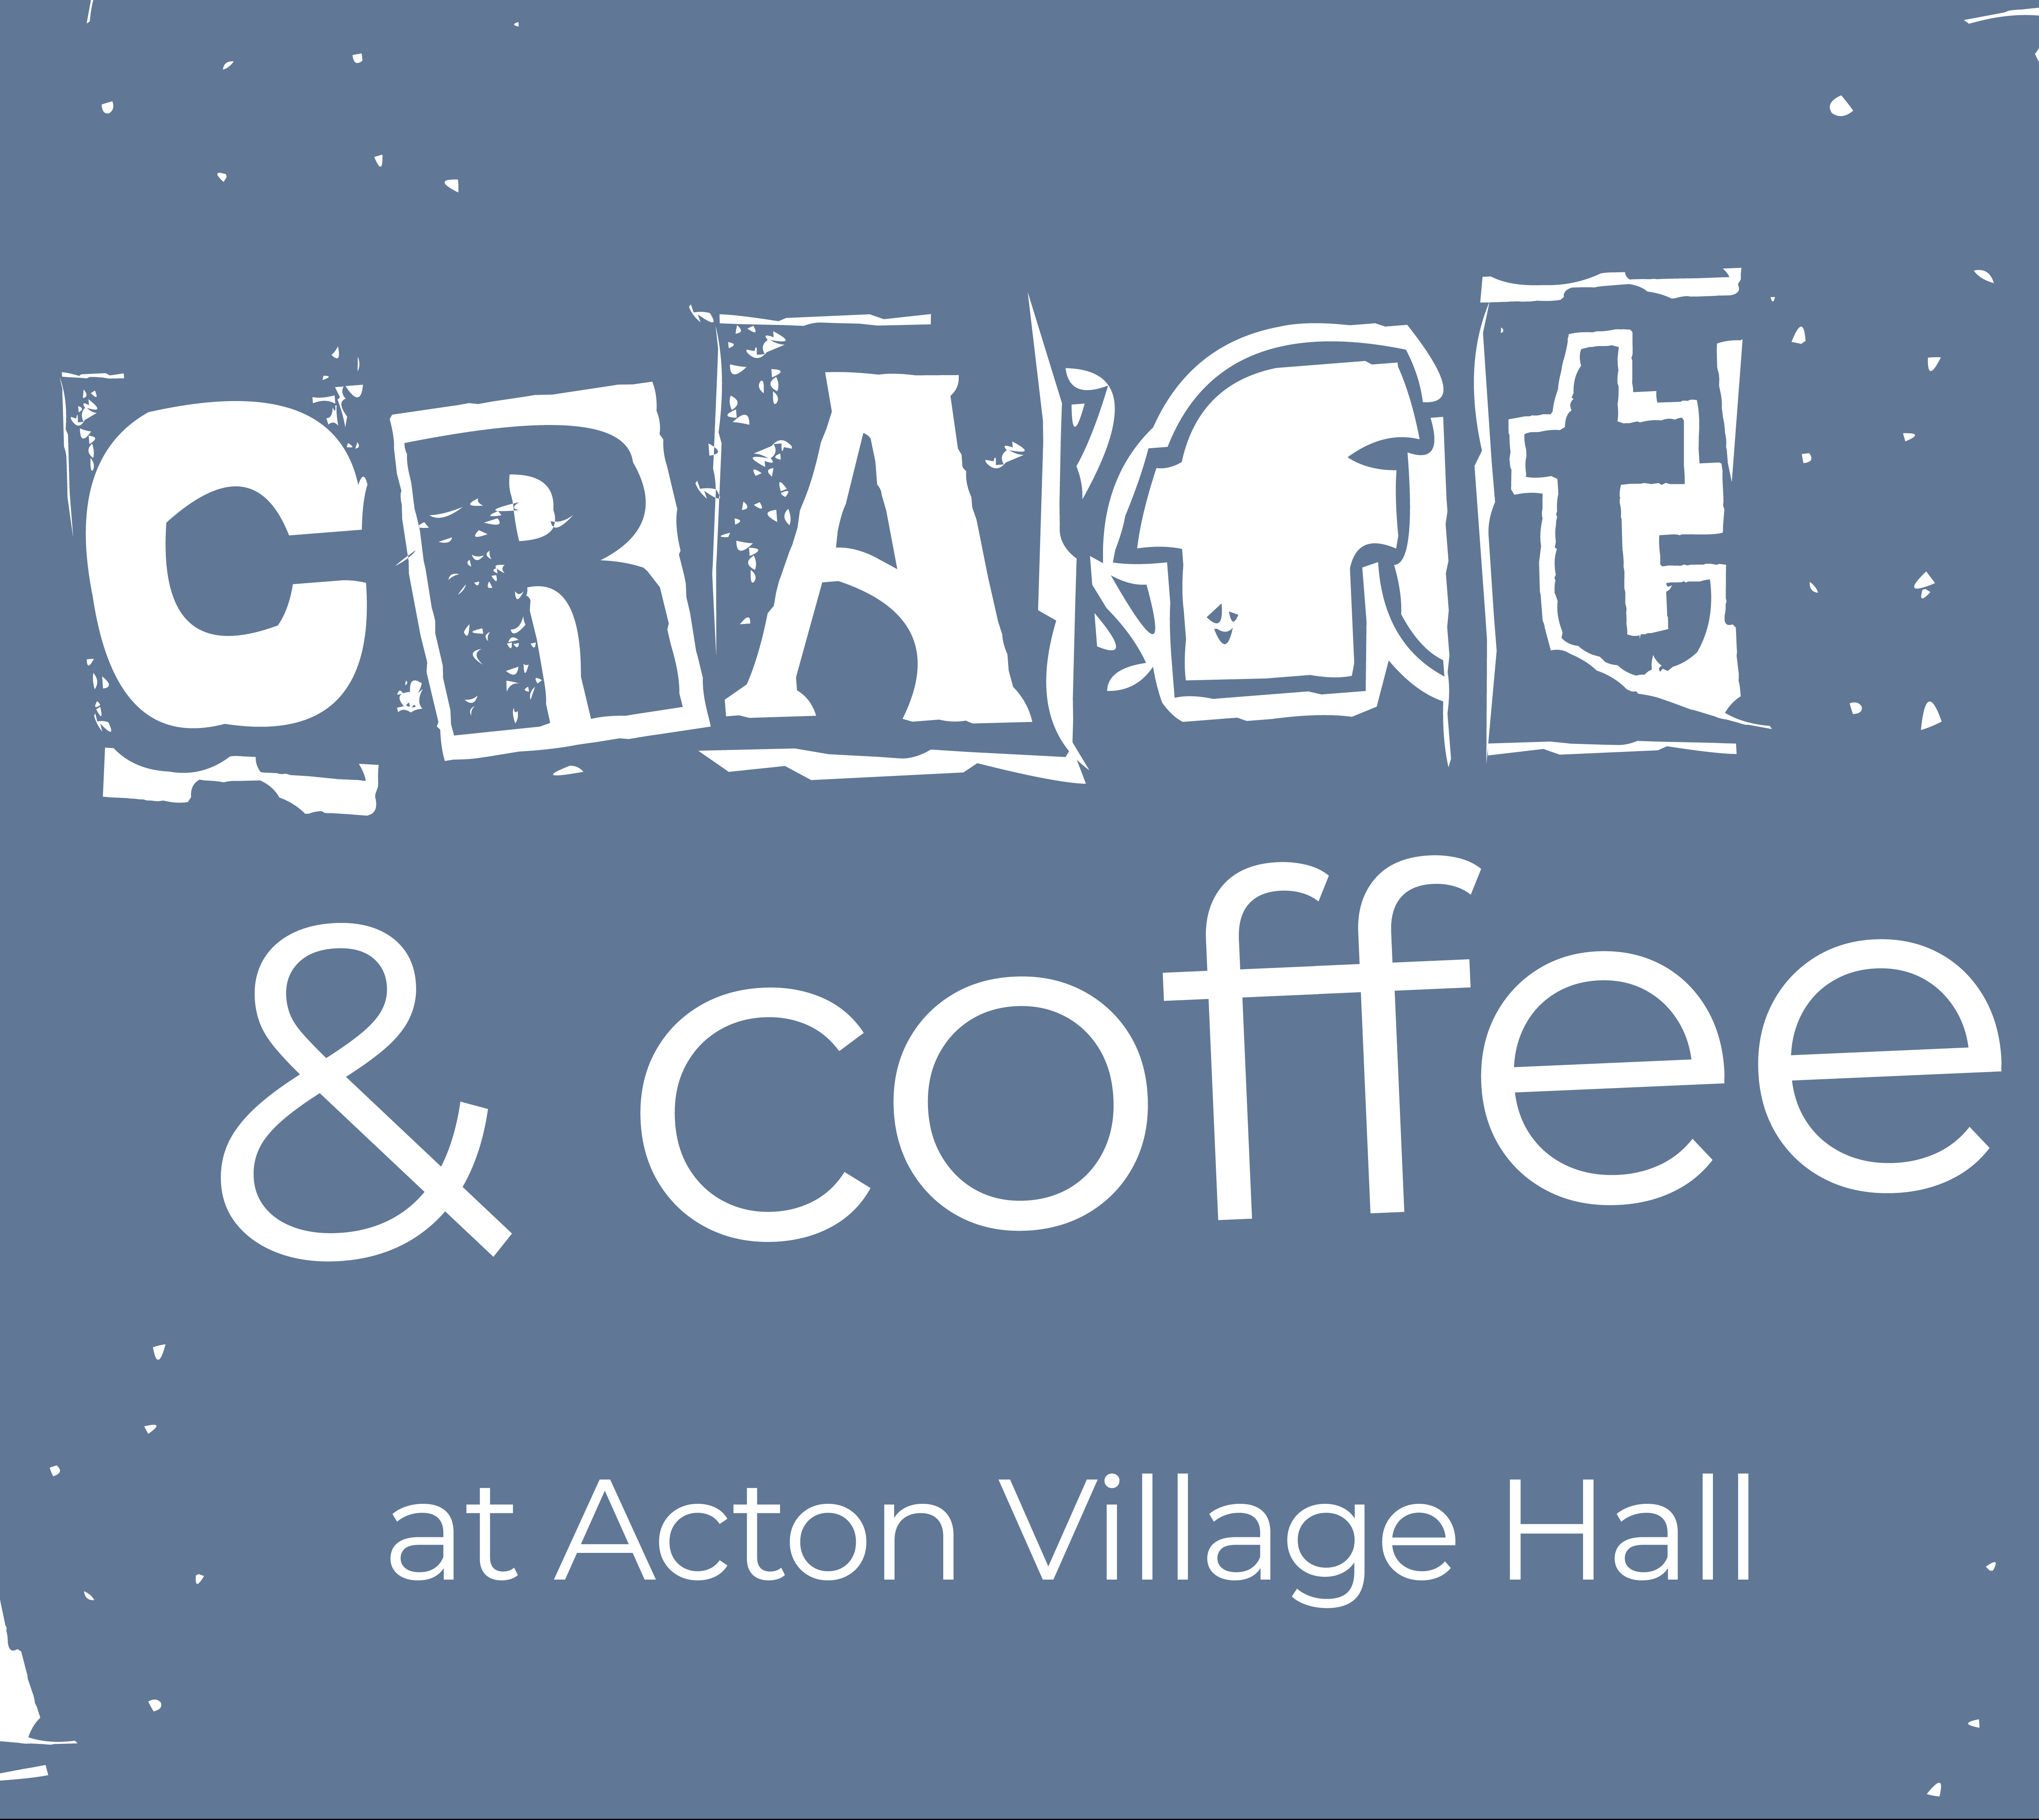 A blue image with overlayed text: Craft & Coffee at Acton Village Hall.